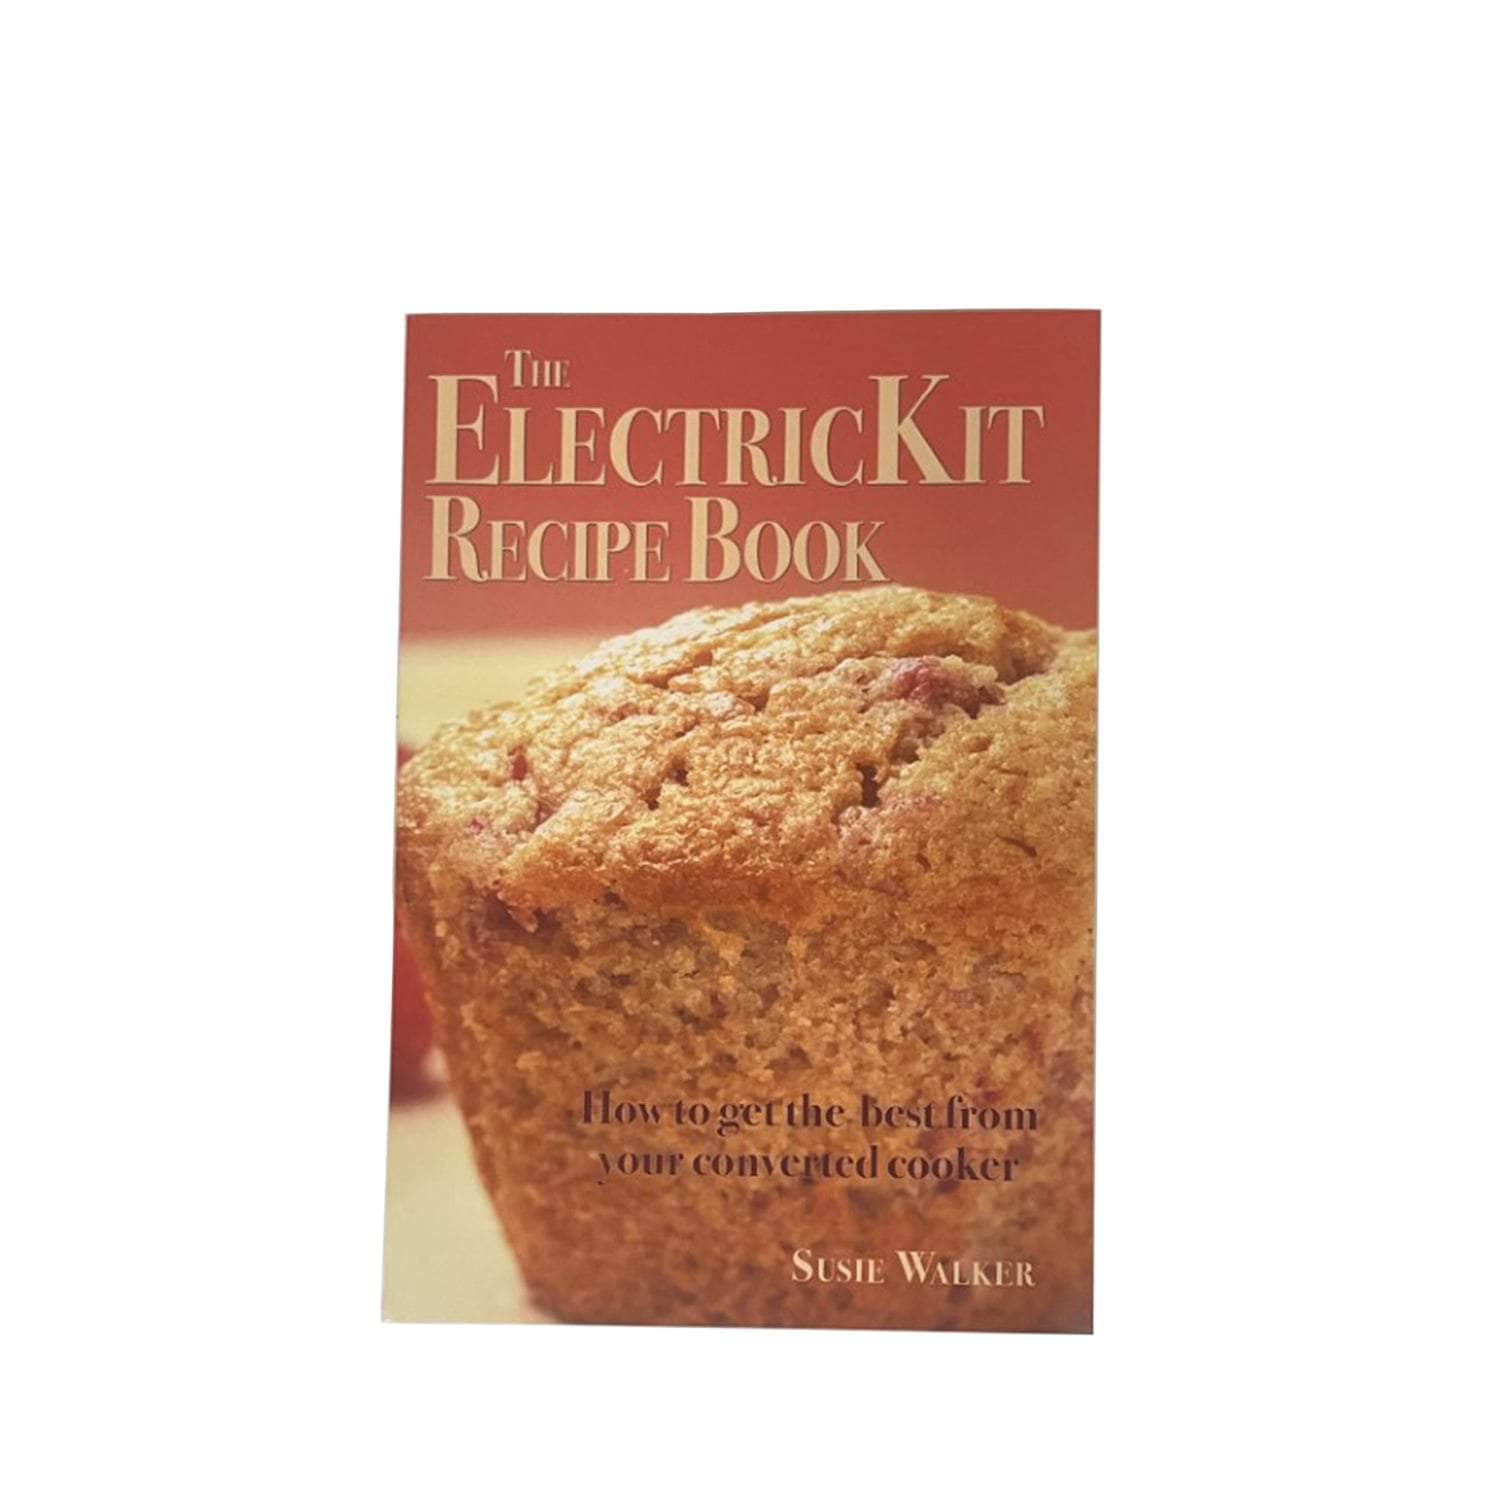 *NEW* The ElectricKit Recipe Book - by Susie Walker